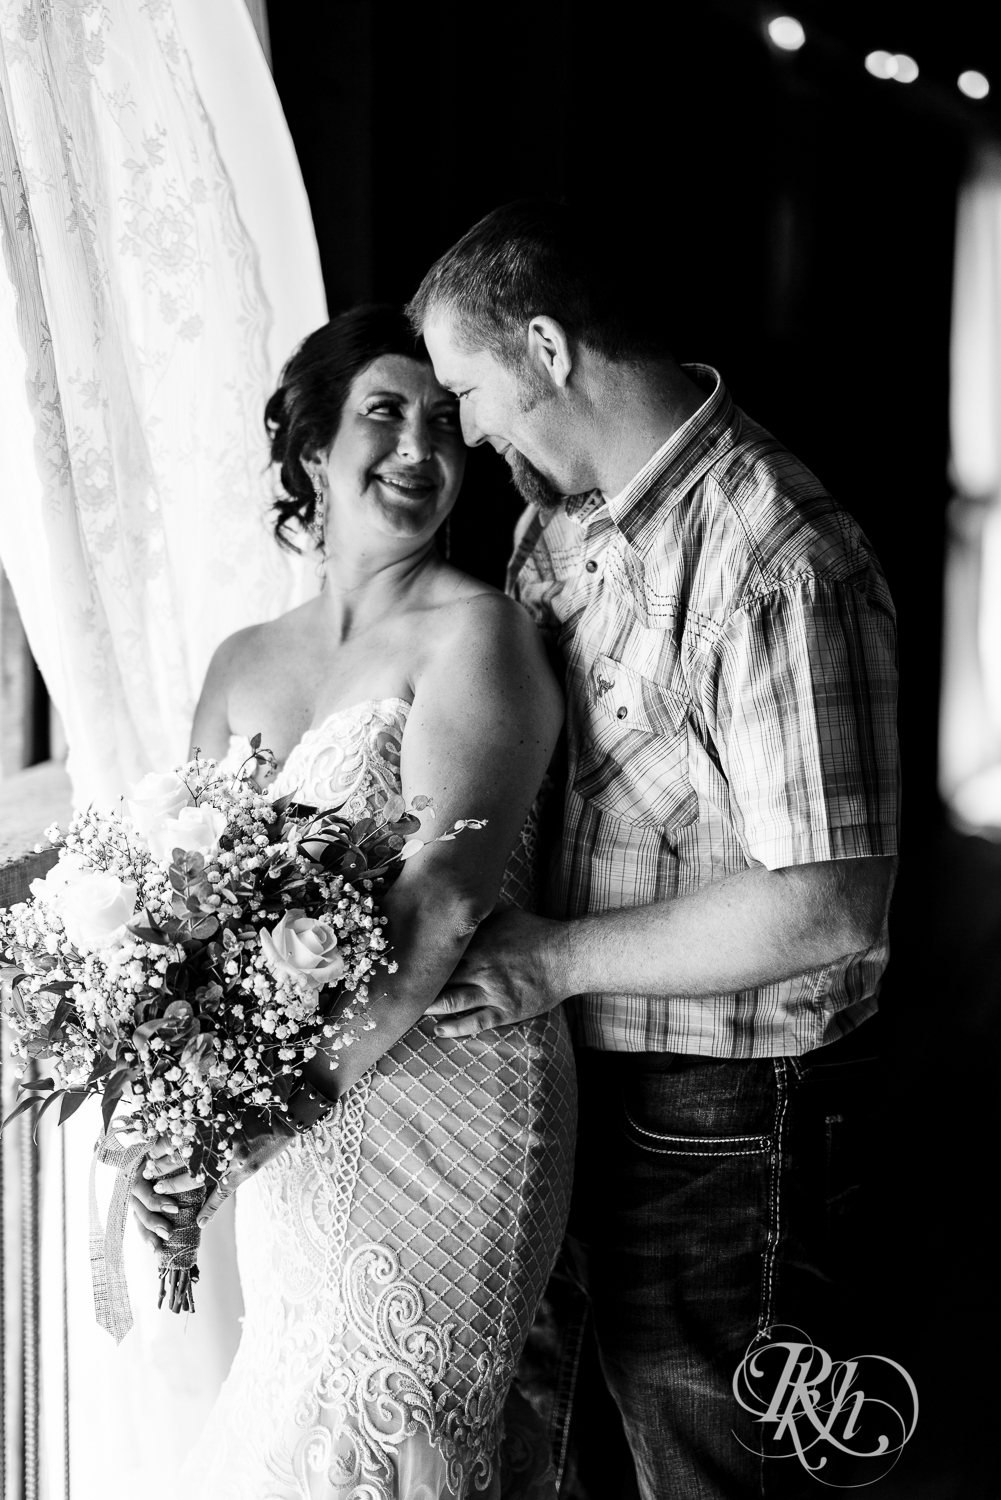 Bride and groom smile by window on wedding day at Croix View Farm in Osceola, Wisconsin.